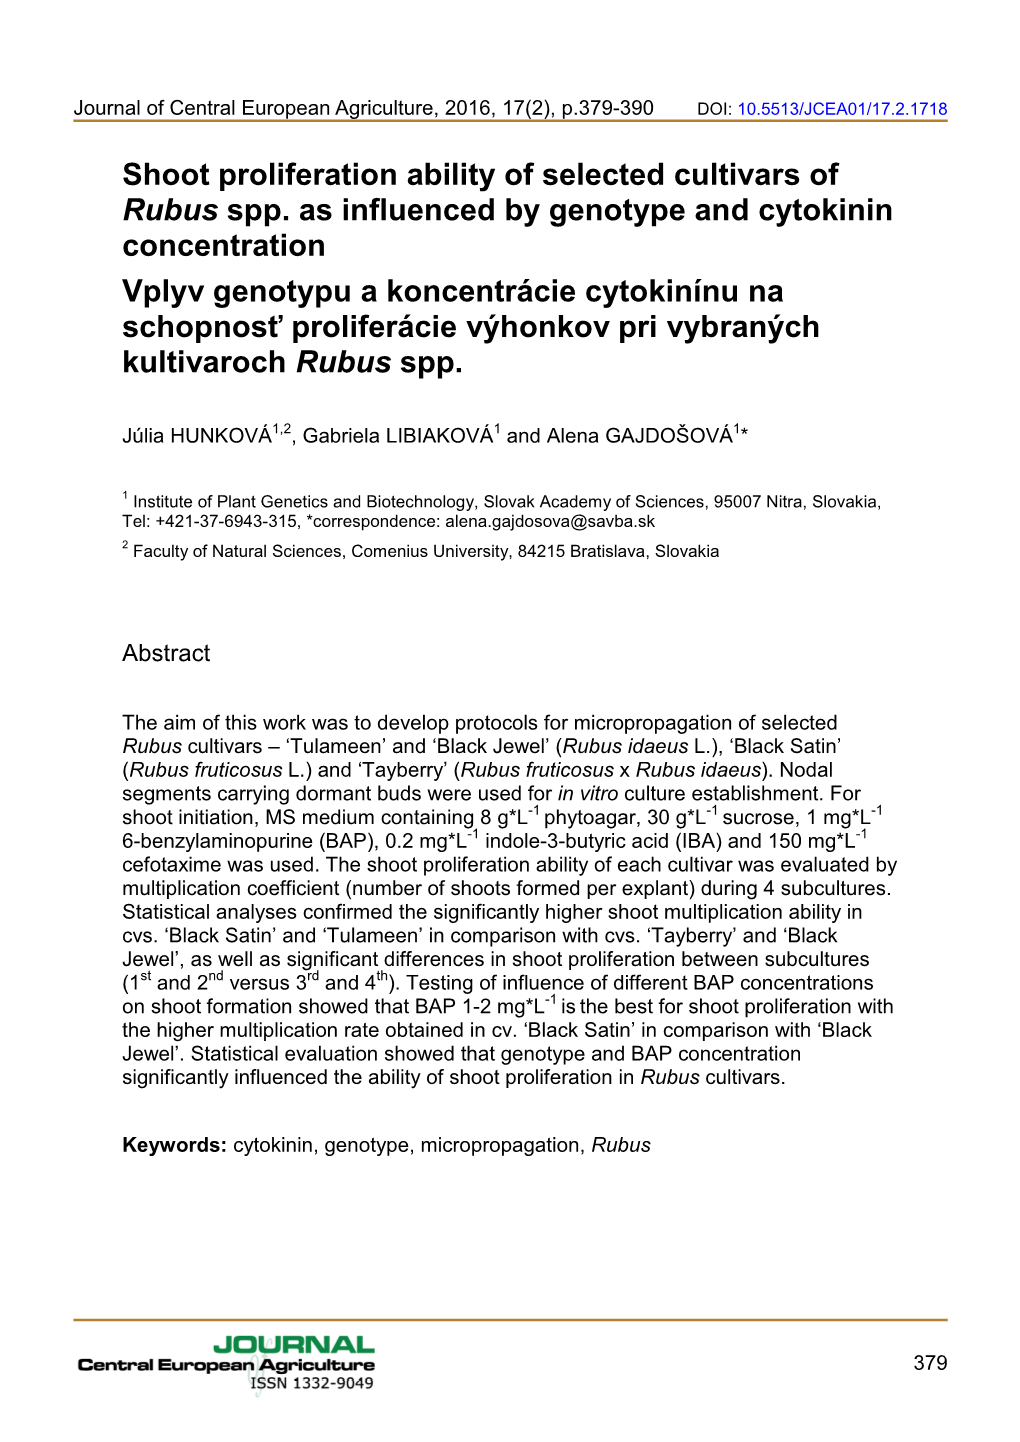 Shoot Proliferation Ability of Selected Cultivars of Rubus Spp. As